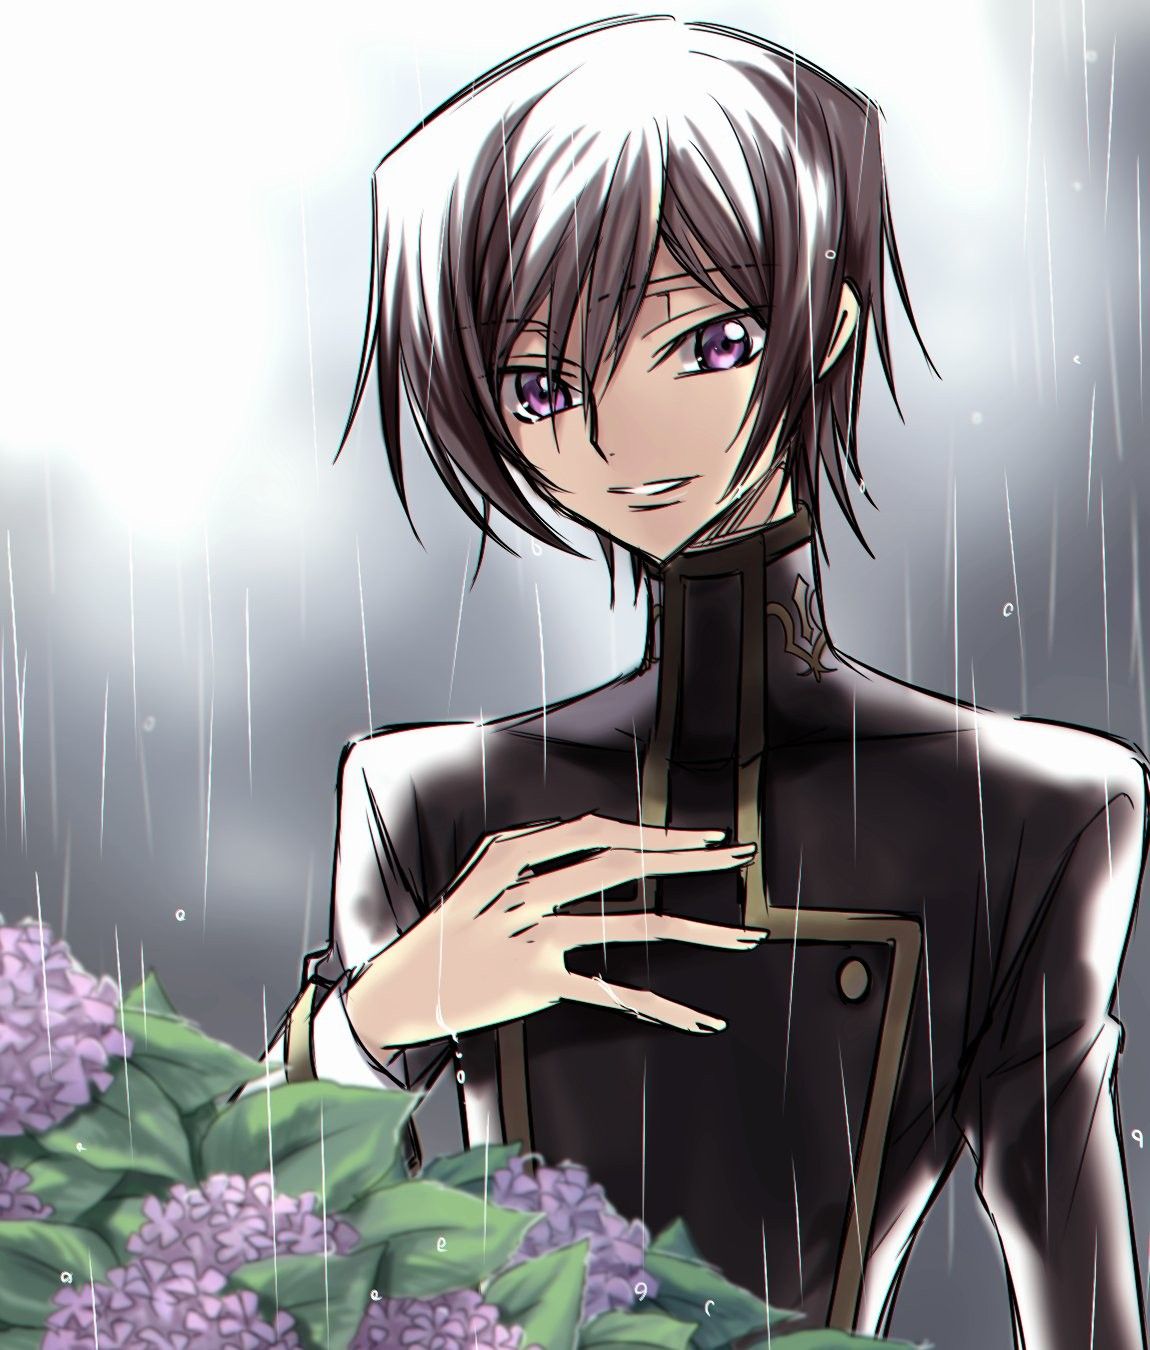 Lelouch from CG. Credit to the artist : @KK20312876